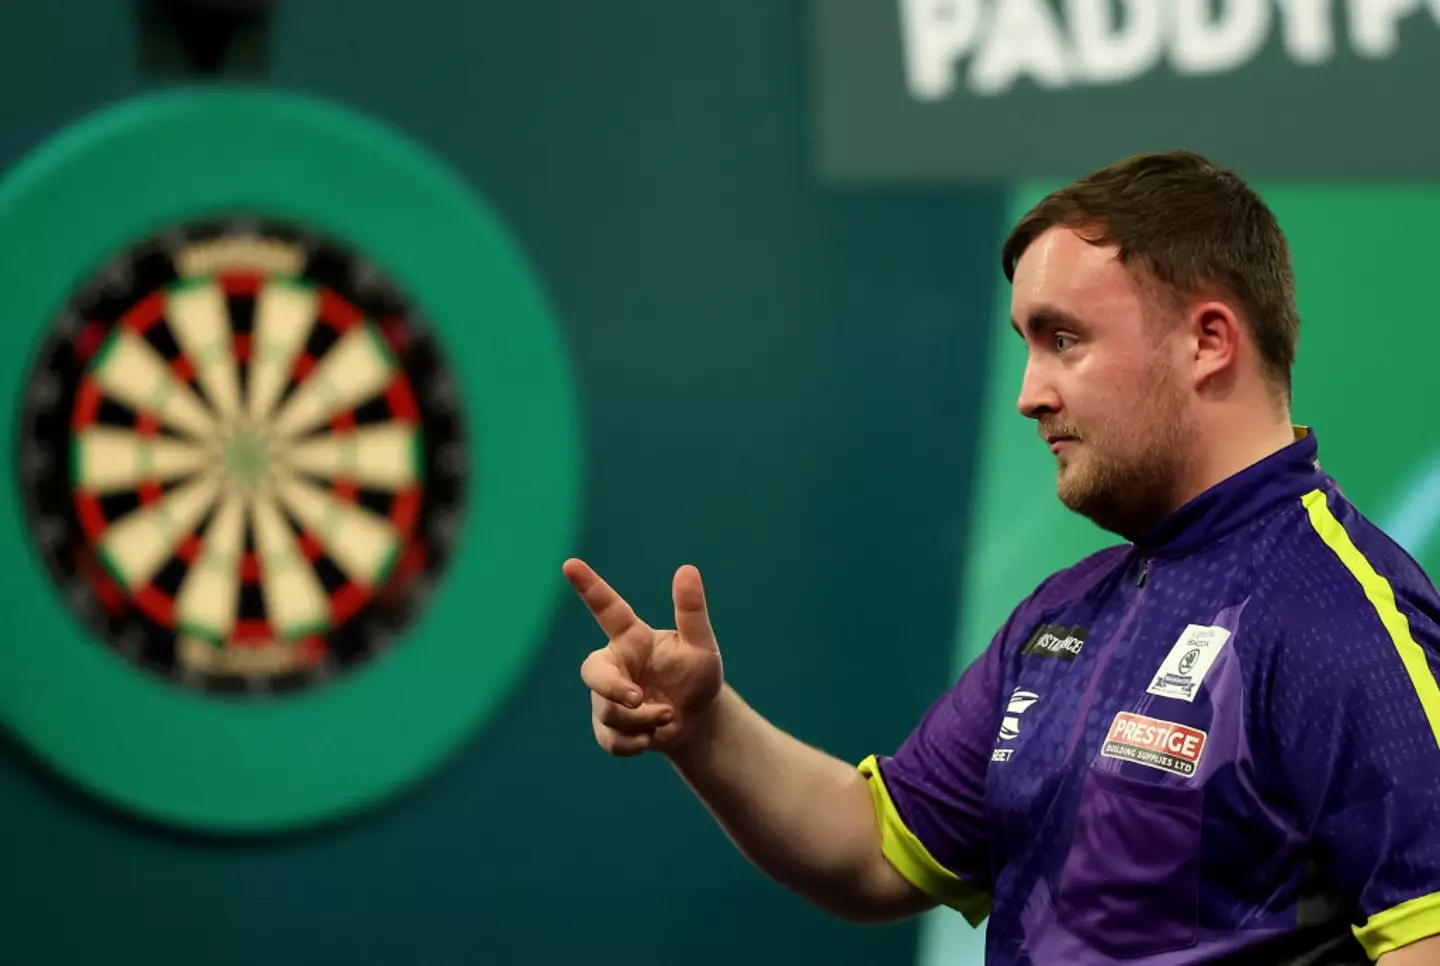 Luke Littler is the youngest ever player to compete in and reach the PDC World Darts Championship final.